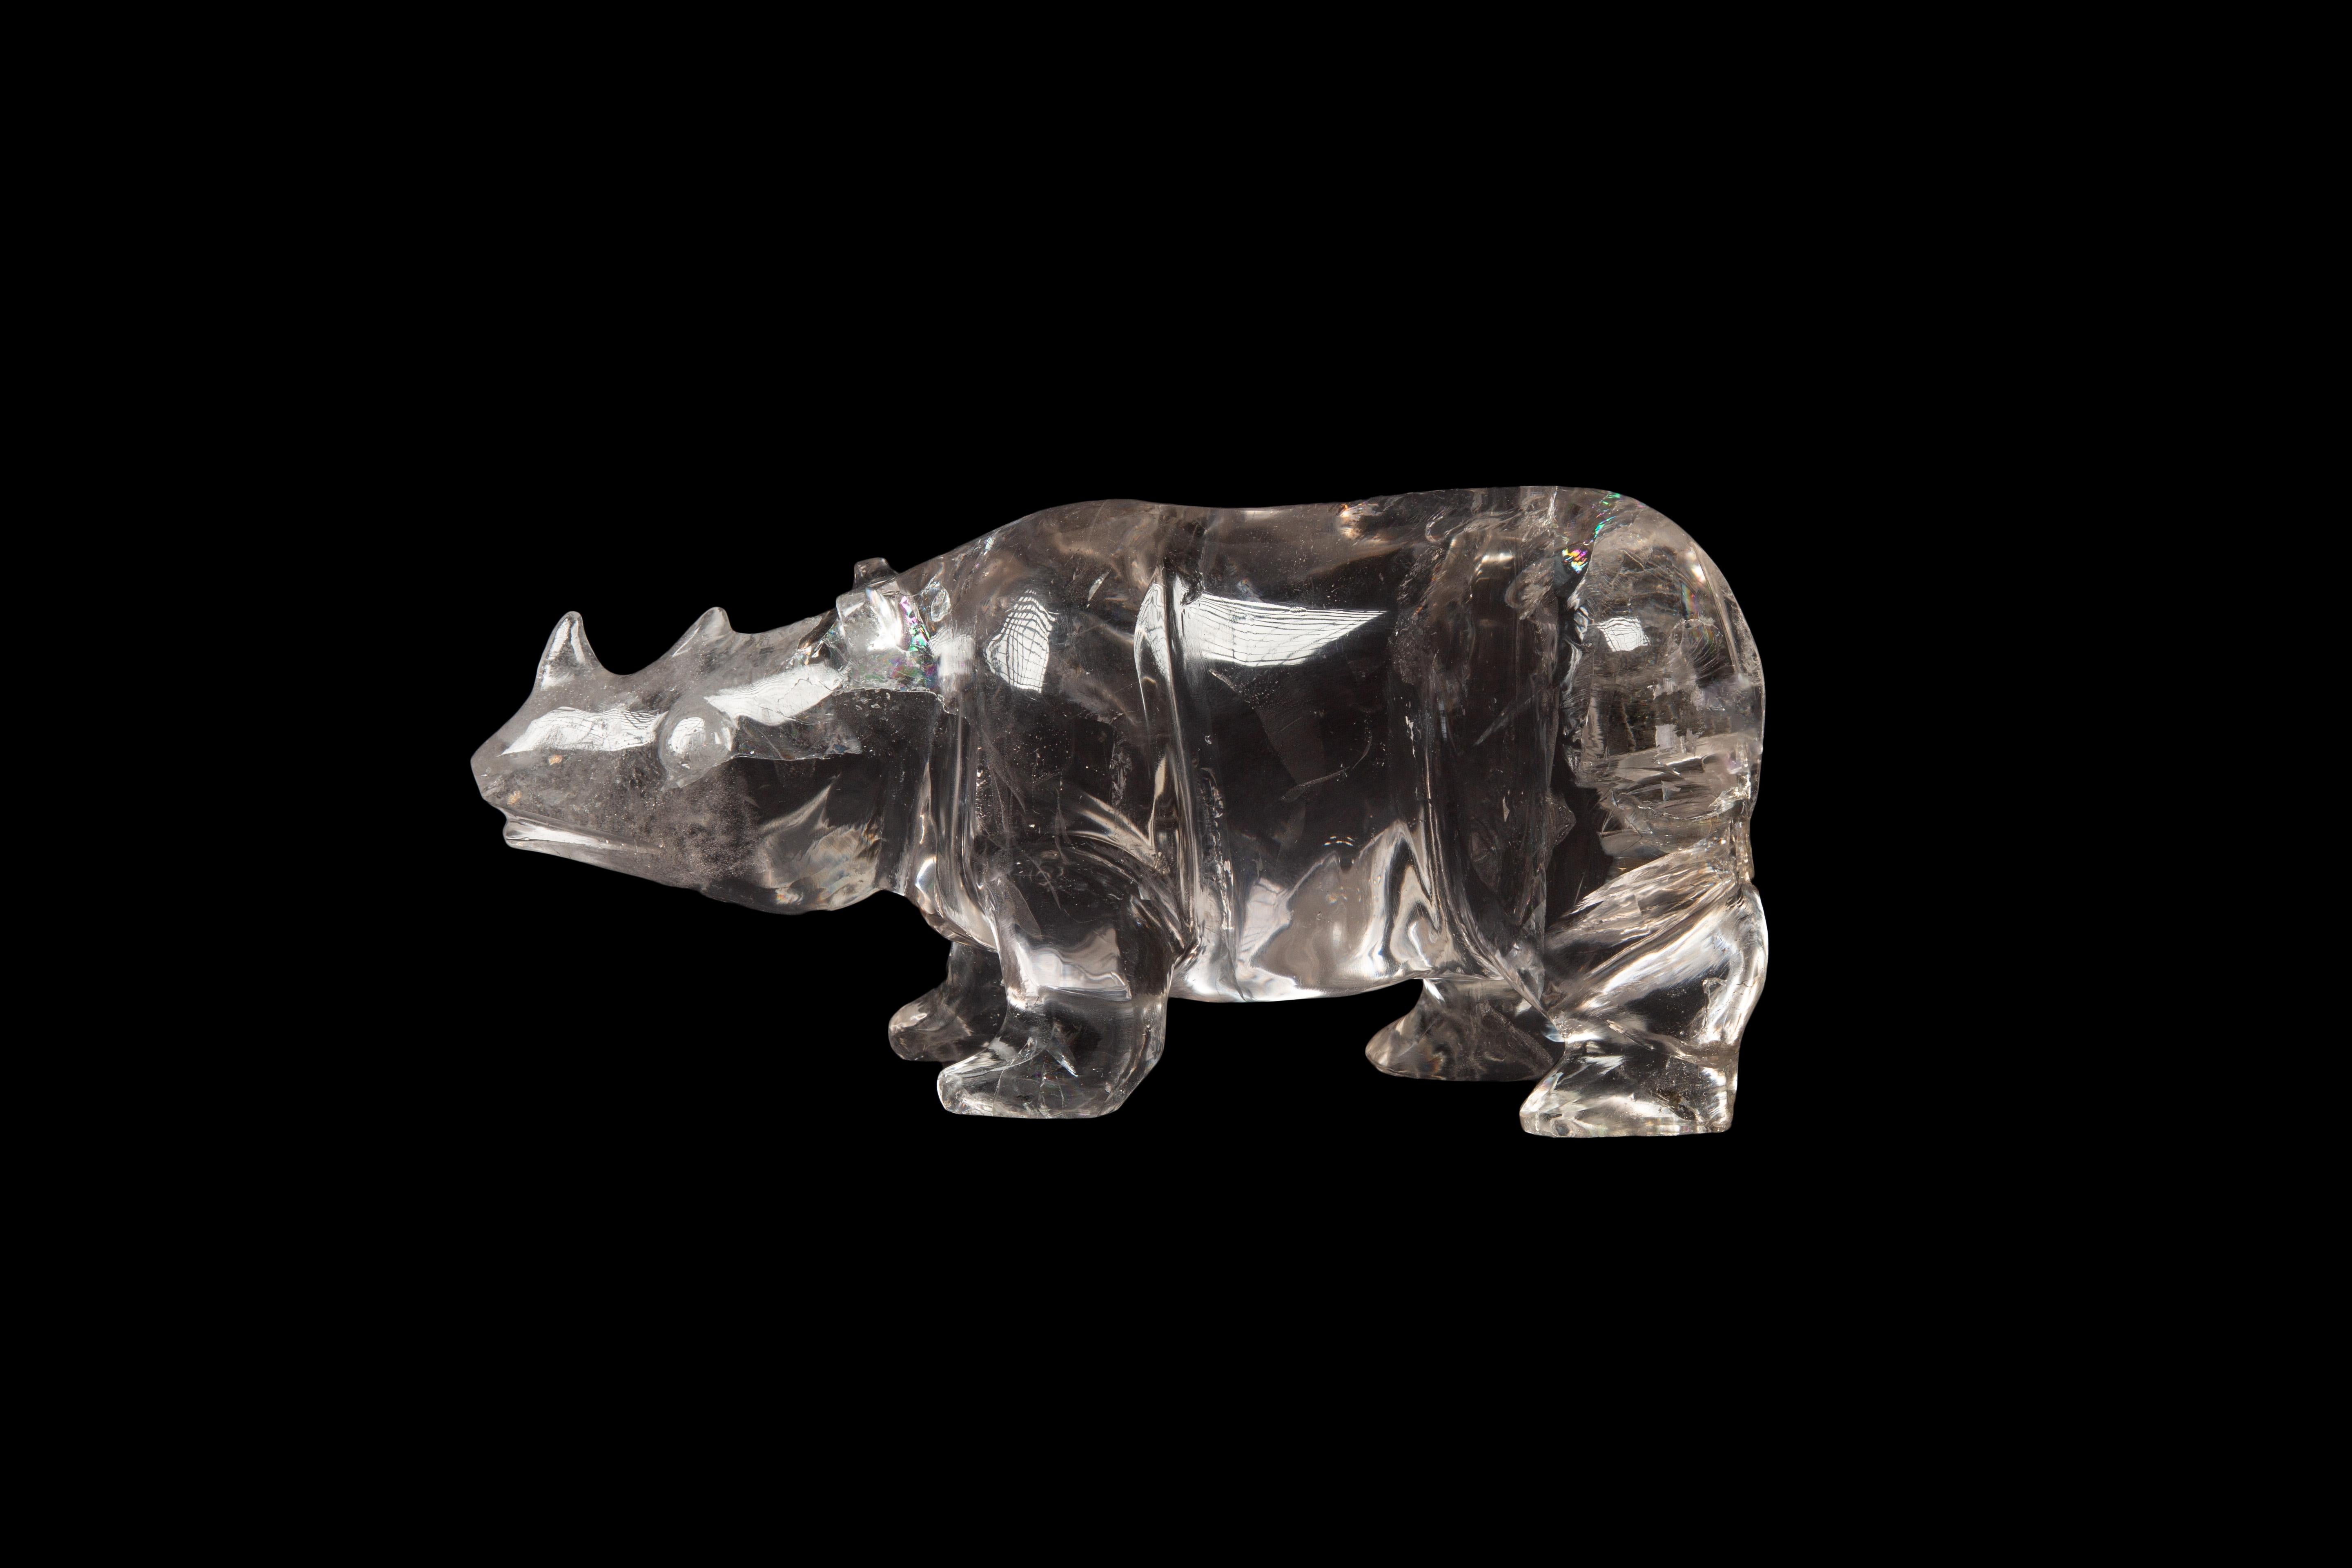 This exceptional large hand-carved rock crystal (quartz) rhino is a magnificent work of art that showcases the skill and craftsmanship of its creator. Standing at 4 inches in height and measuring 3 inches in width and 8 inches in length, this piece